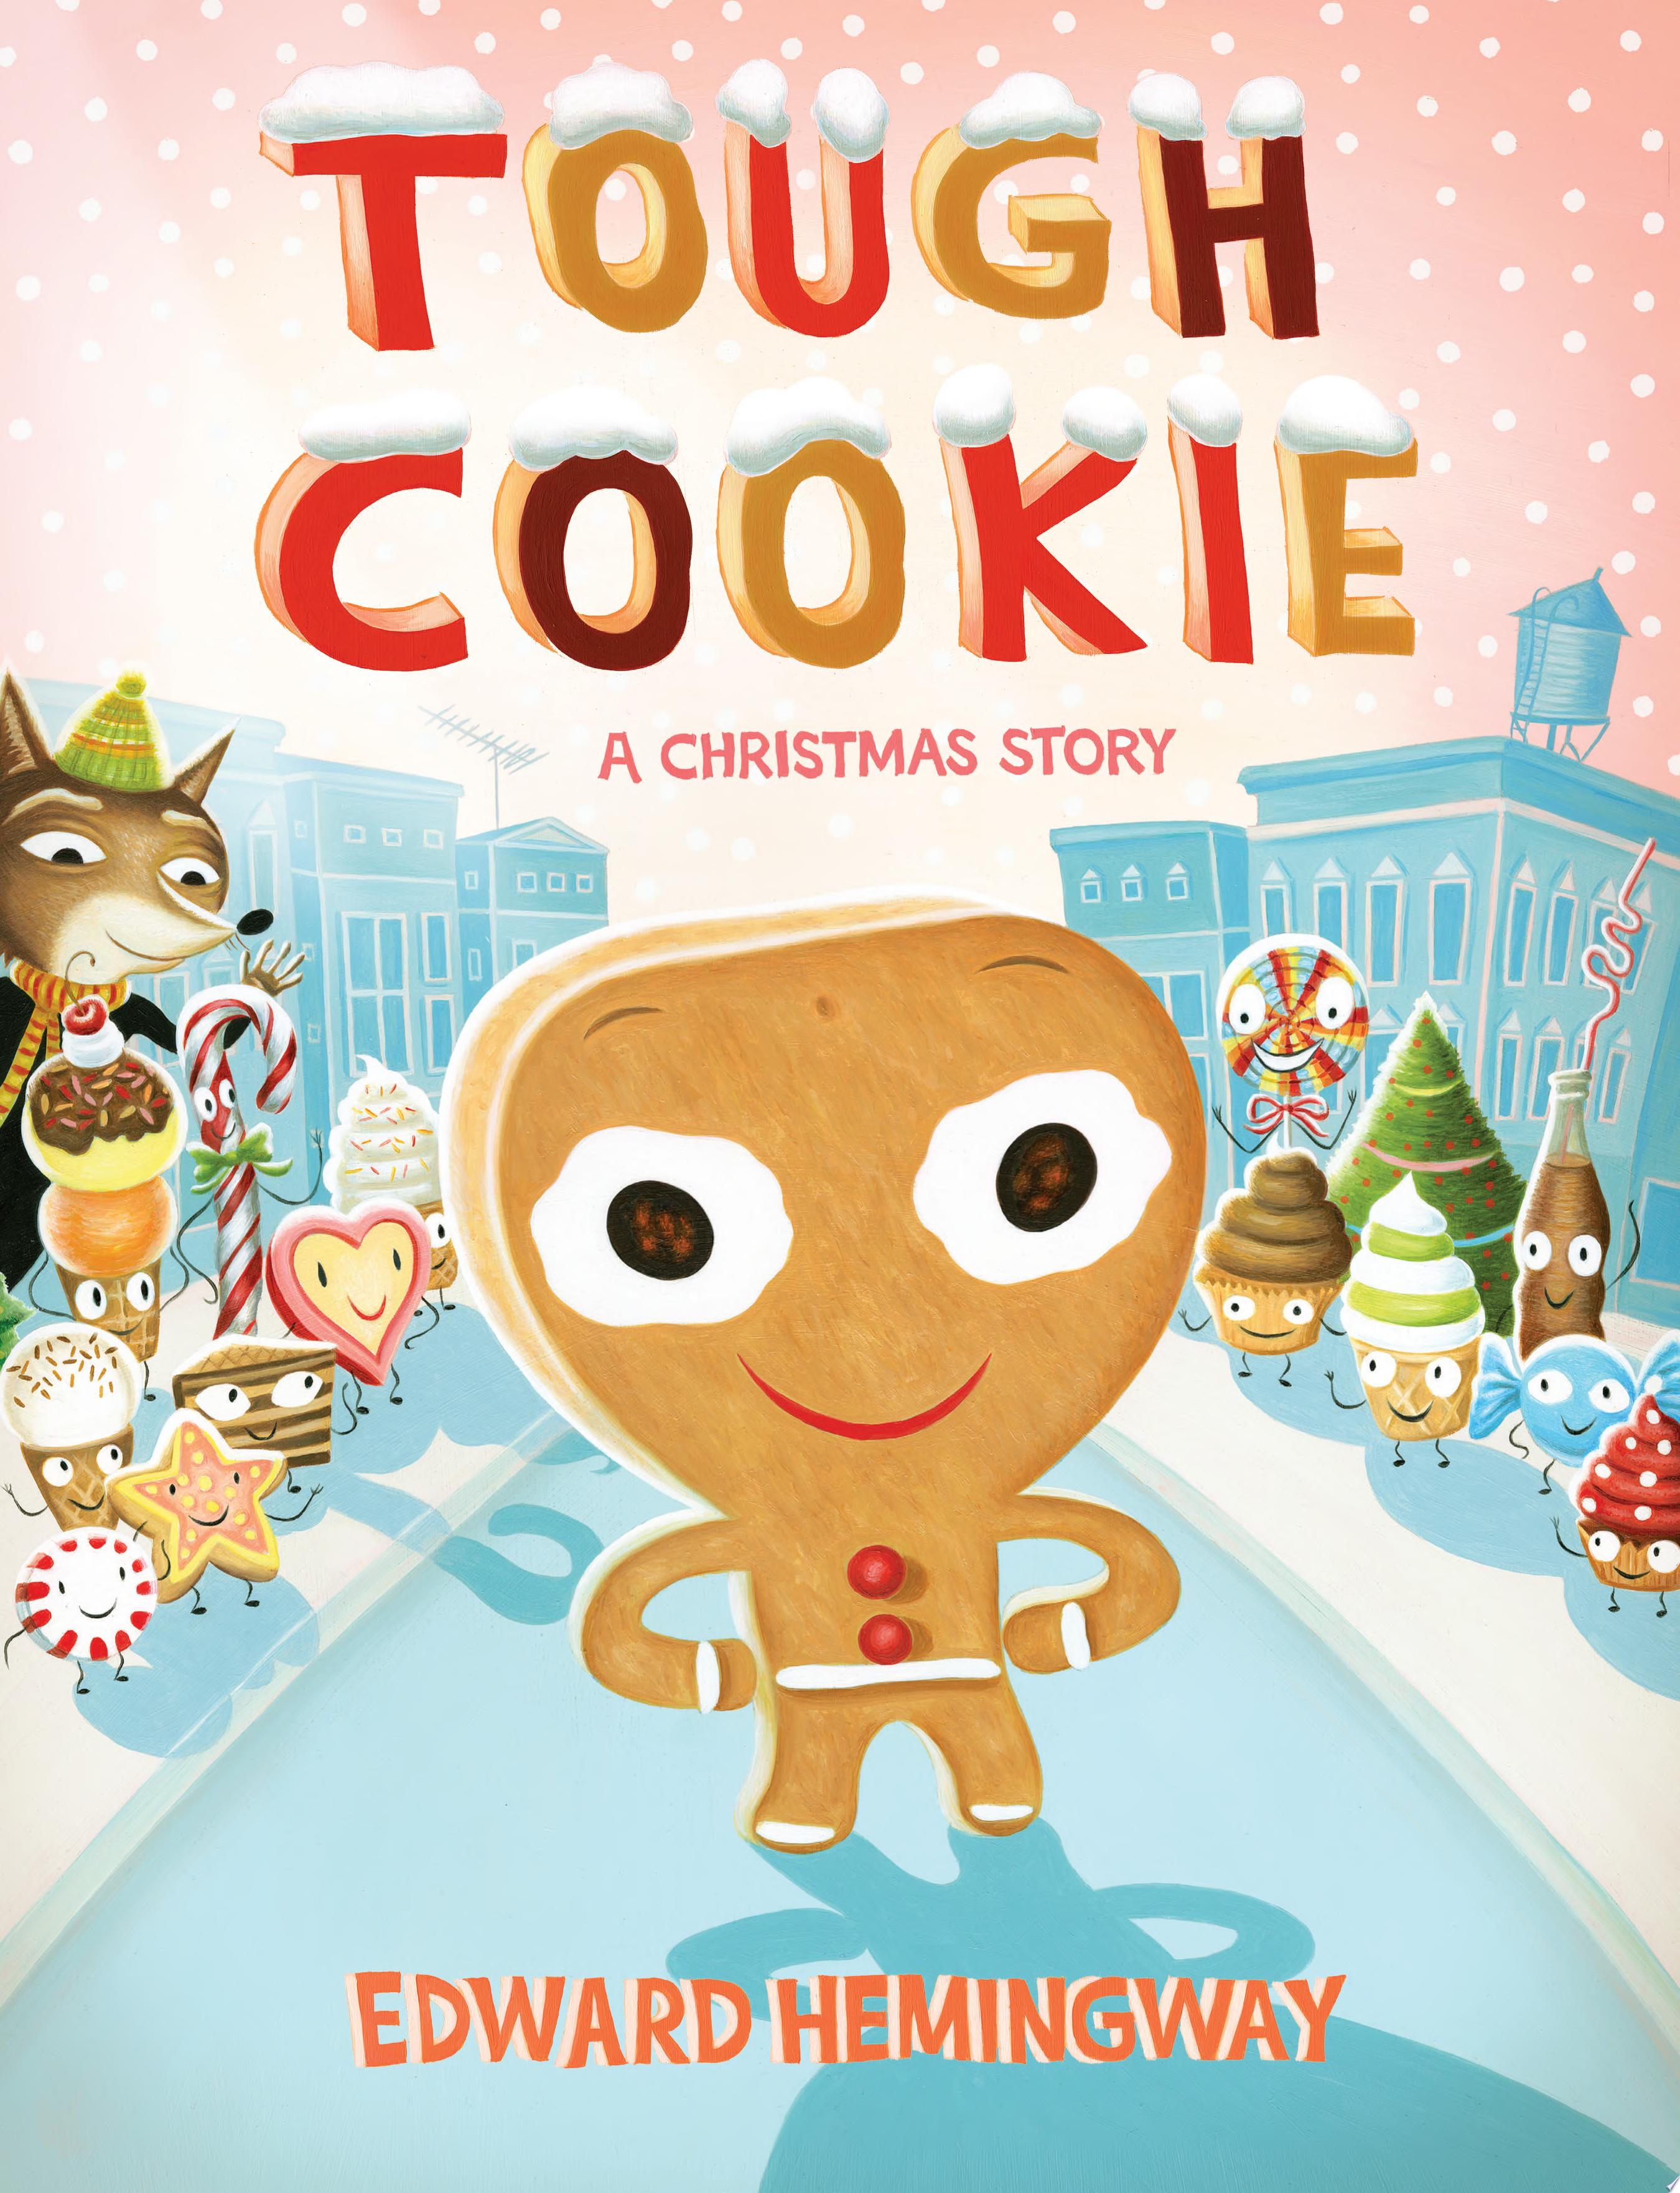 Image for "Tough Cookie"